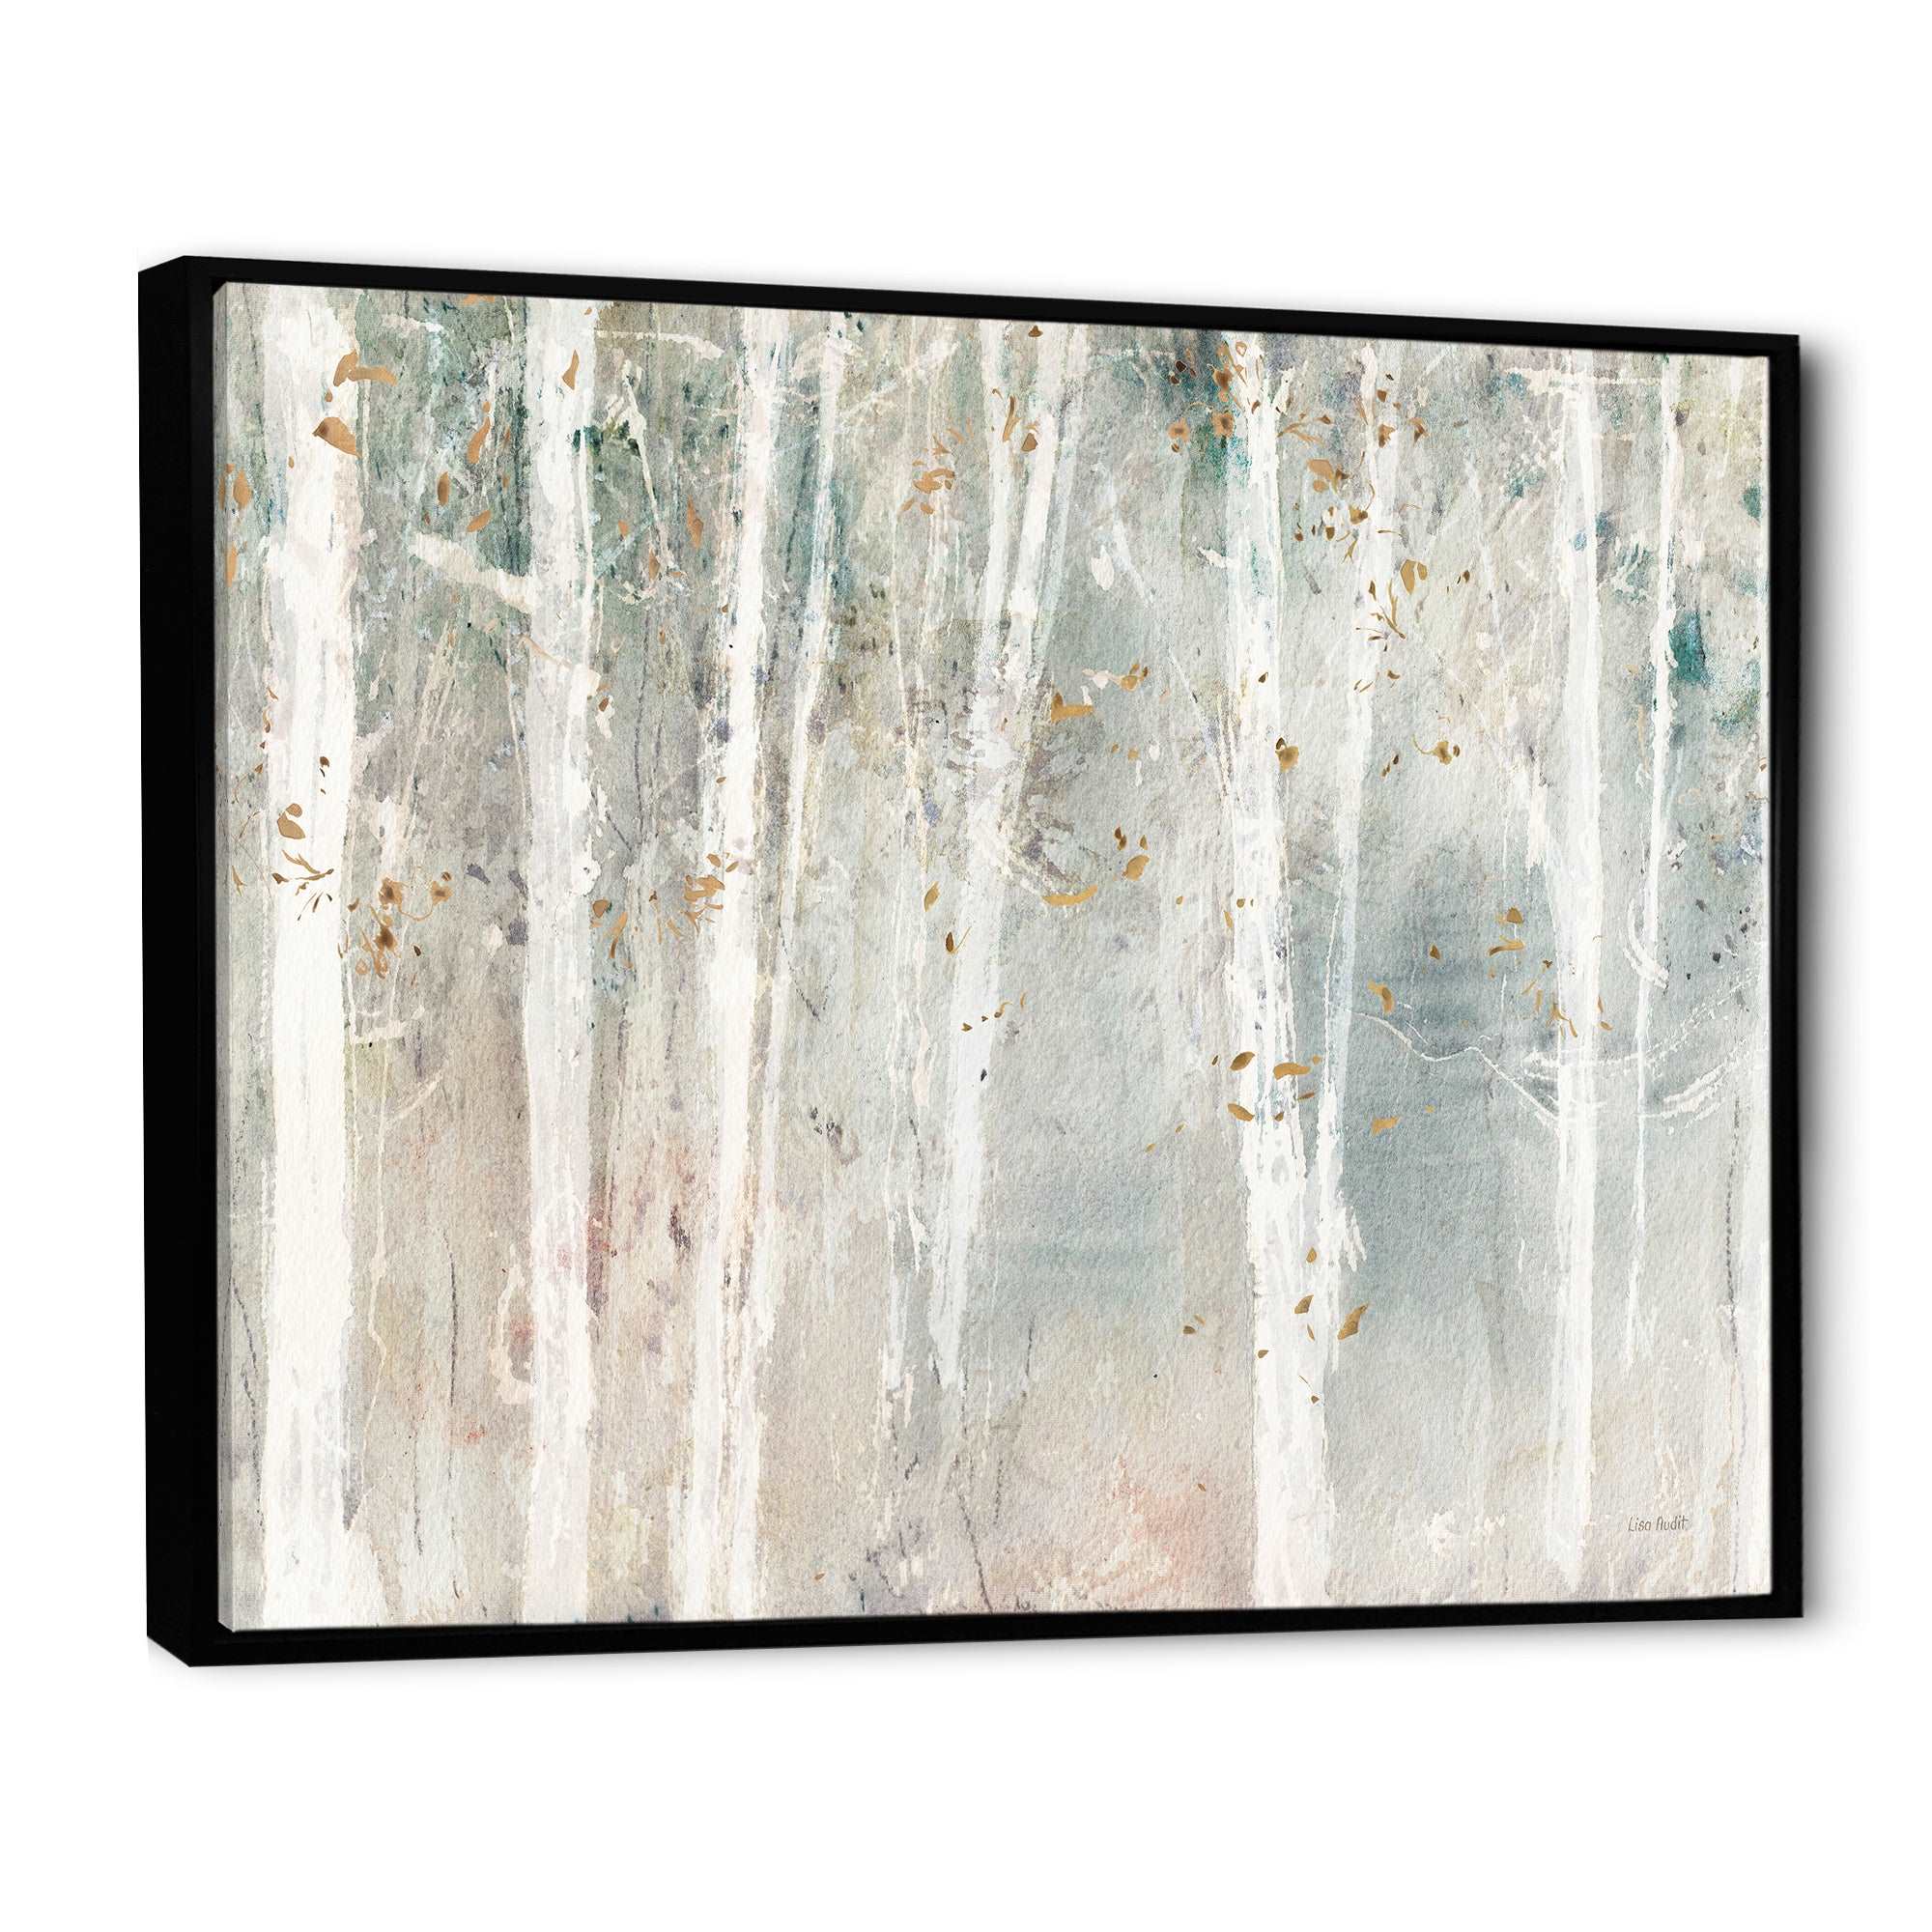 A Woodland Walk into the Forest VII Framed Canvas Vibrant Black - 1.5" Thick